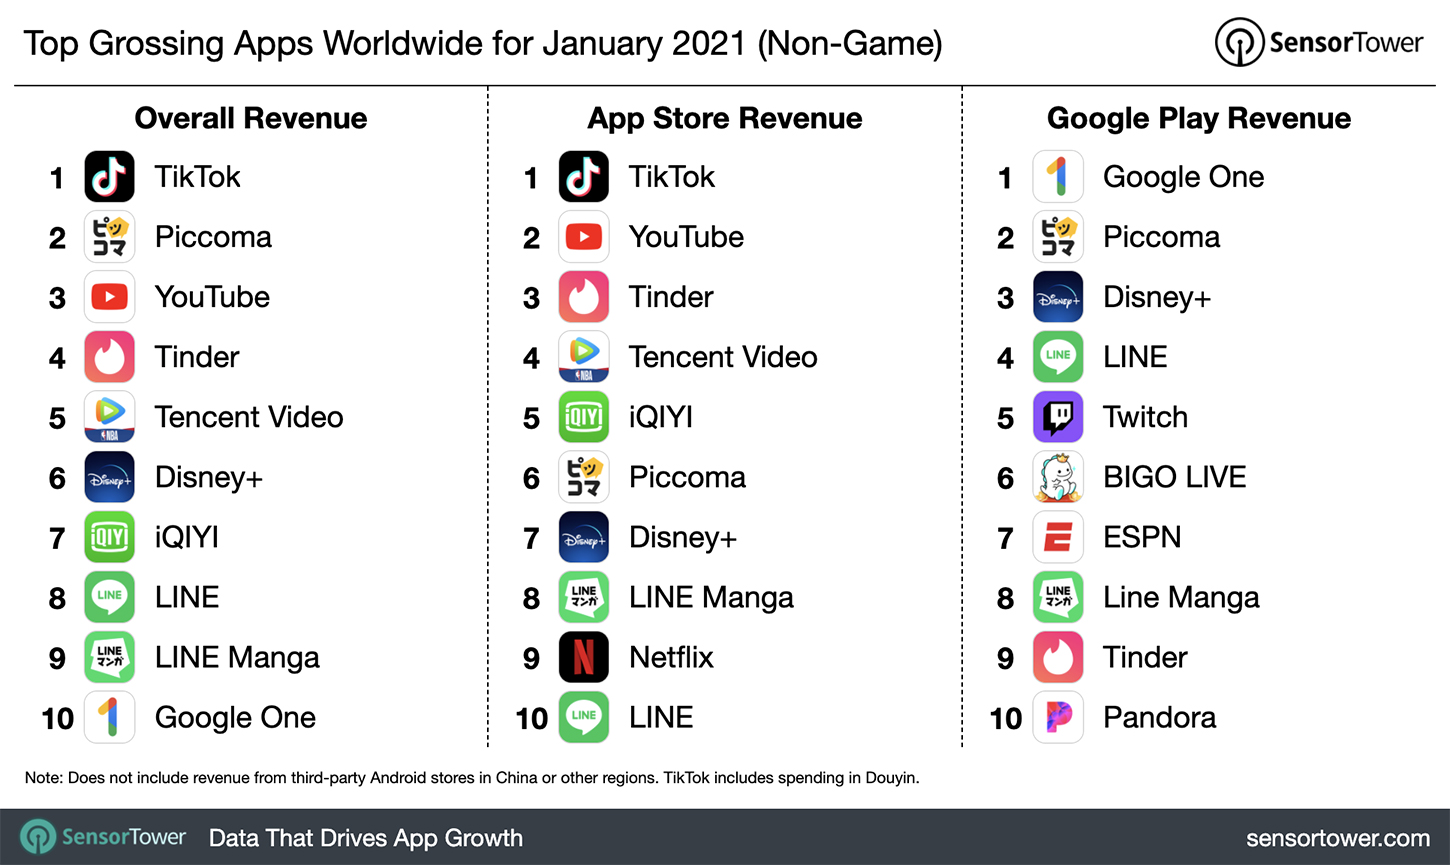 “Top Grossing Apps Worldwide for January 2021